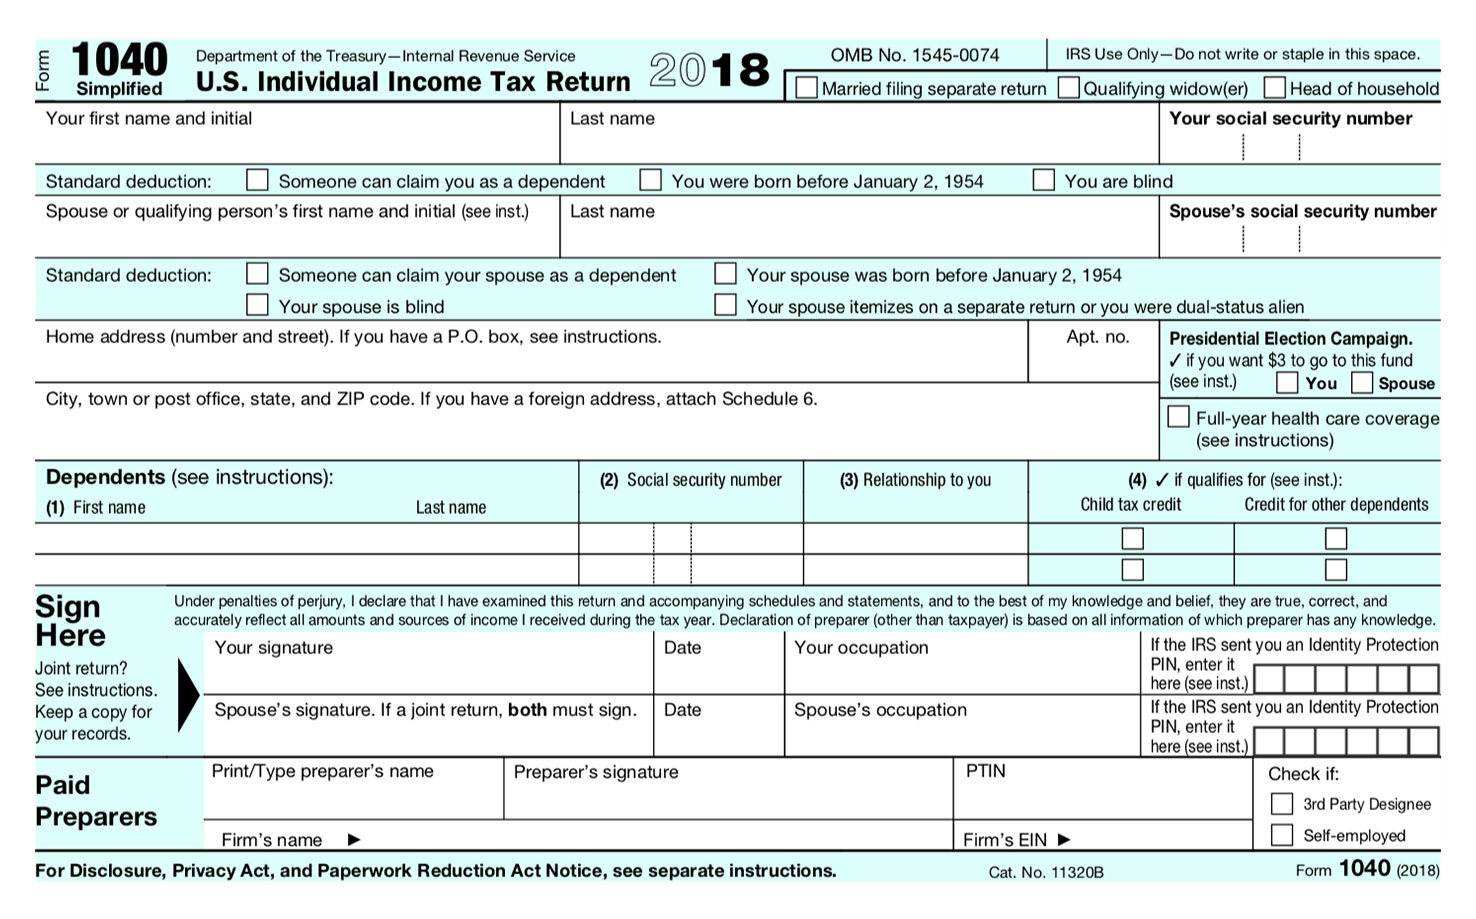 Irs And Treasury Preview Postcard-Size Draft Form 1040